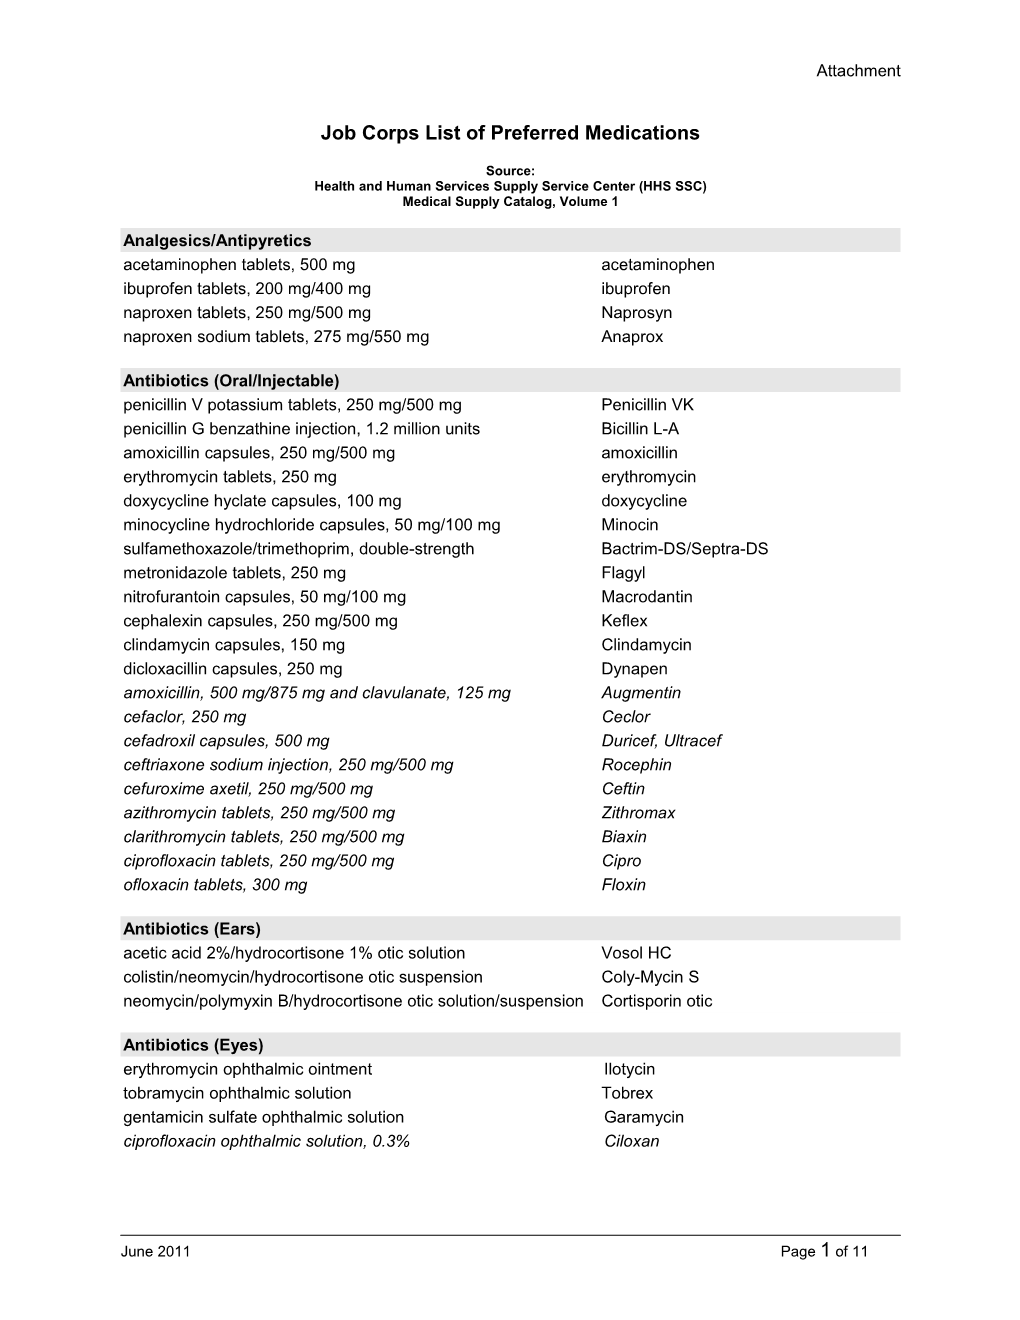 Job Corps List of Recommended Medications